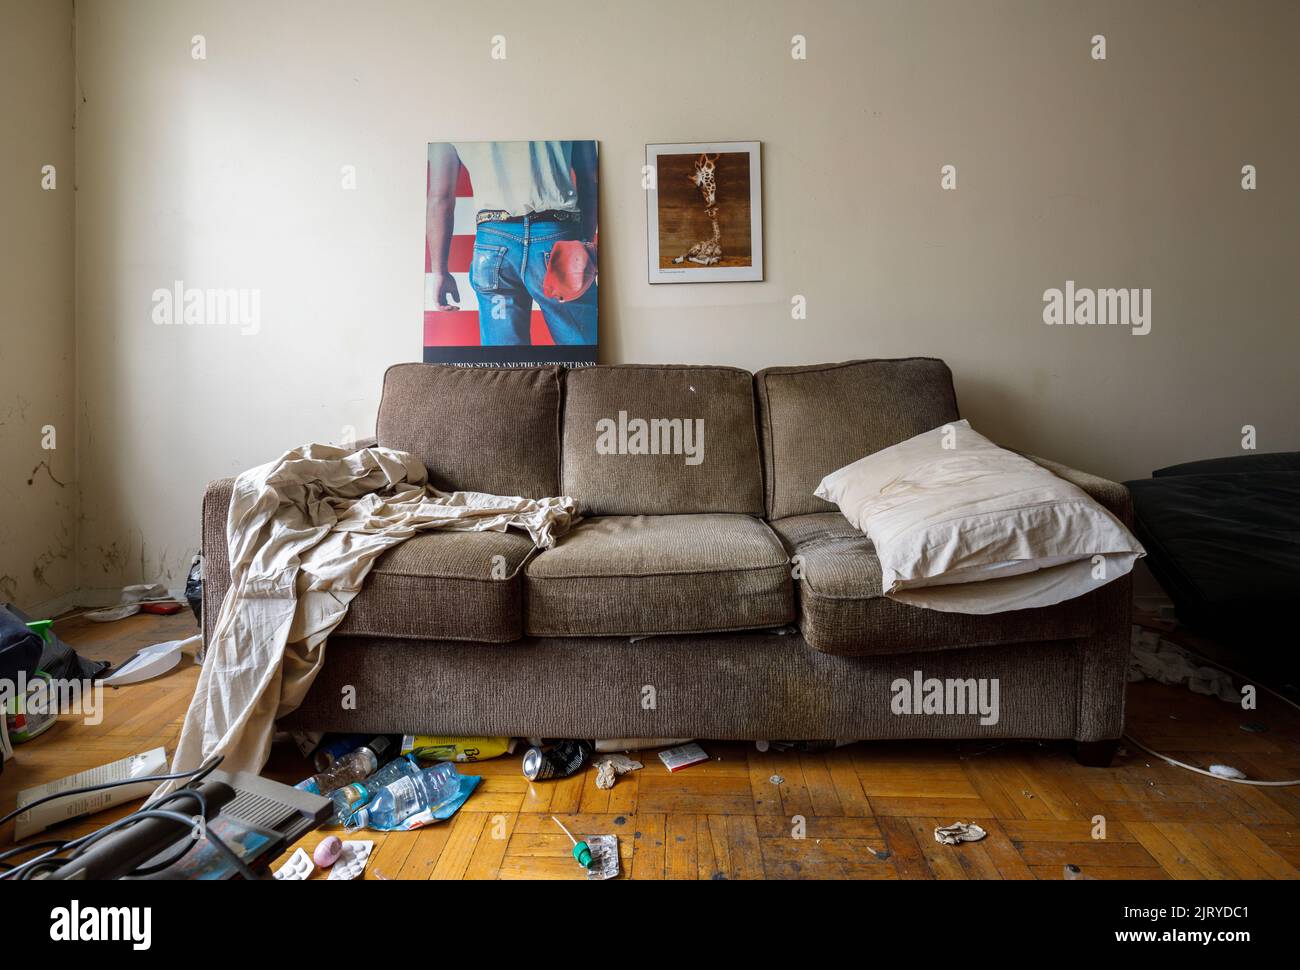 A couch in a dirty room that is set up for sleeping. This building has since been demolished. Stock Photo